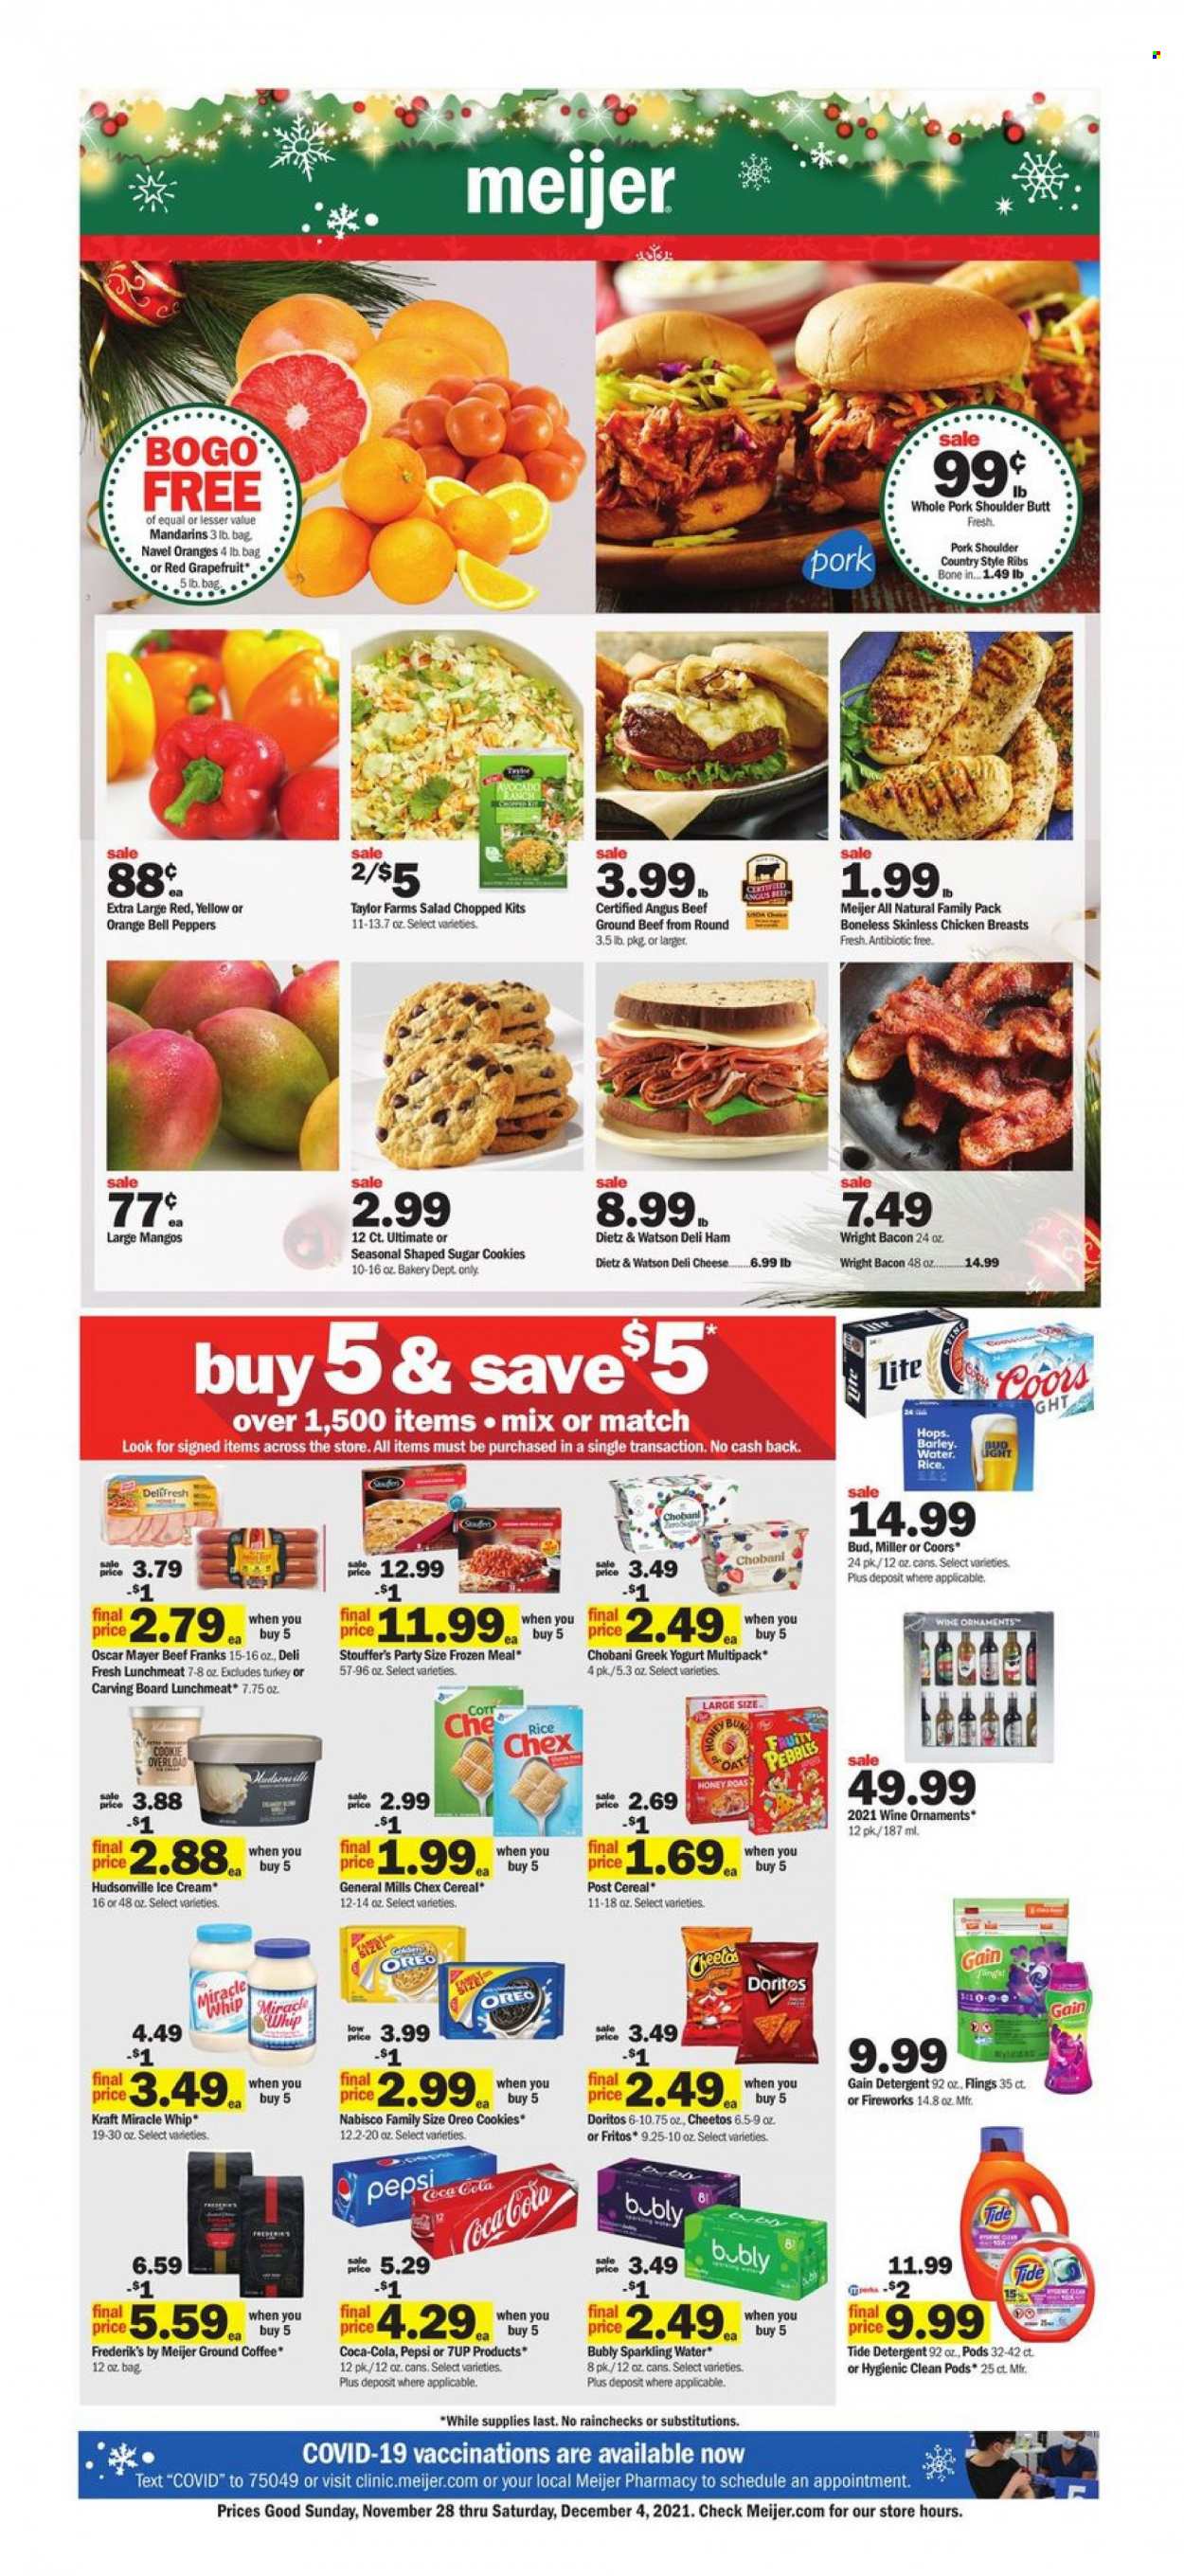 Meijer Flyer - 11/28/2021 - 12/04/2021 - Sales products - bell peppers, salad, peppers, grapefruits, mandarines, mango, orange, Kraft®, bacon, ham, Oscar Mayer, Dietz & Watson, lunch meat, cheese, greek yoghurt, Oreo, yoghurt, Chobani, Miracle Whip, ice cream, Stouffer's, cookies, Doritos, Fritos, Cheetos, oats, cereals, Fruity Pebbles, honey, Coca-Cola, Pepsi, 7UP, sparkling water, coffee, ground coffee, wine, beer, Miller, beef meat, ground beef, pork meat, pork ribs, pork shoulder, country style ribs, detergent, Gain, Tide, Coors, navel oranges. Page 1.